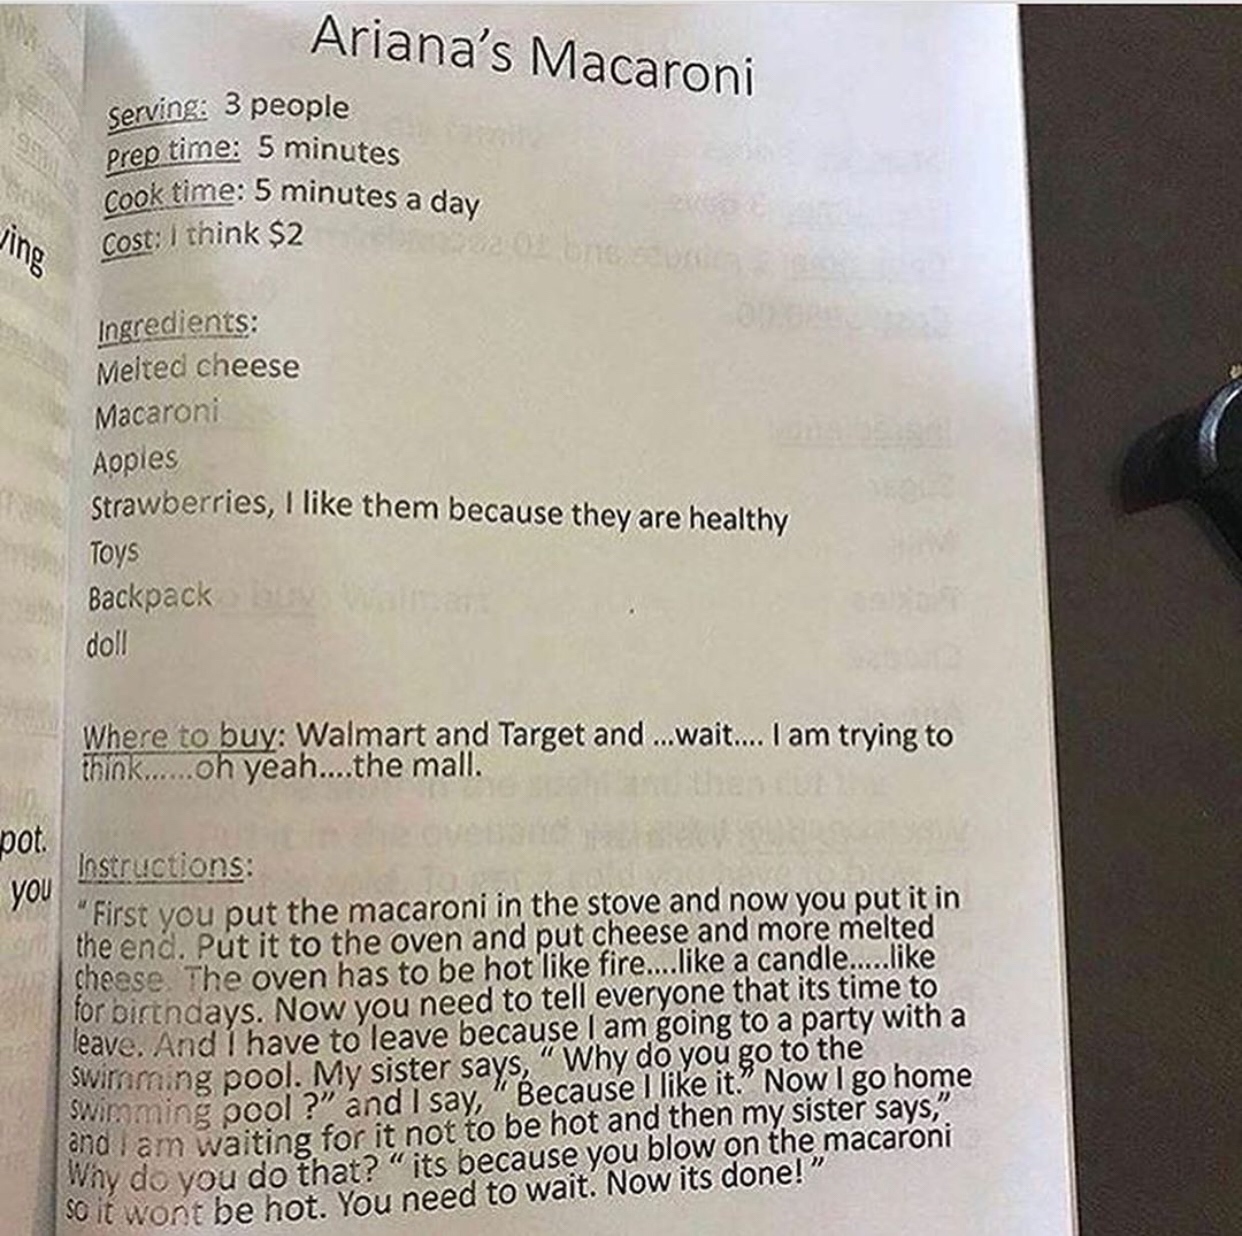 kids cookbook twitter - Ariana's Macaroni Serving 3 people Prep time 5 minutes rook time 5 minutes a day Cost I think $2 Ingredients Melted cheese Macaroni Aopies Strawberries, I them because they are healthy Toys Backpack doll Where to buy Walmart and Ta